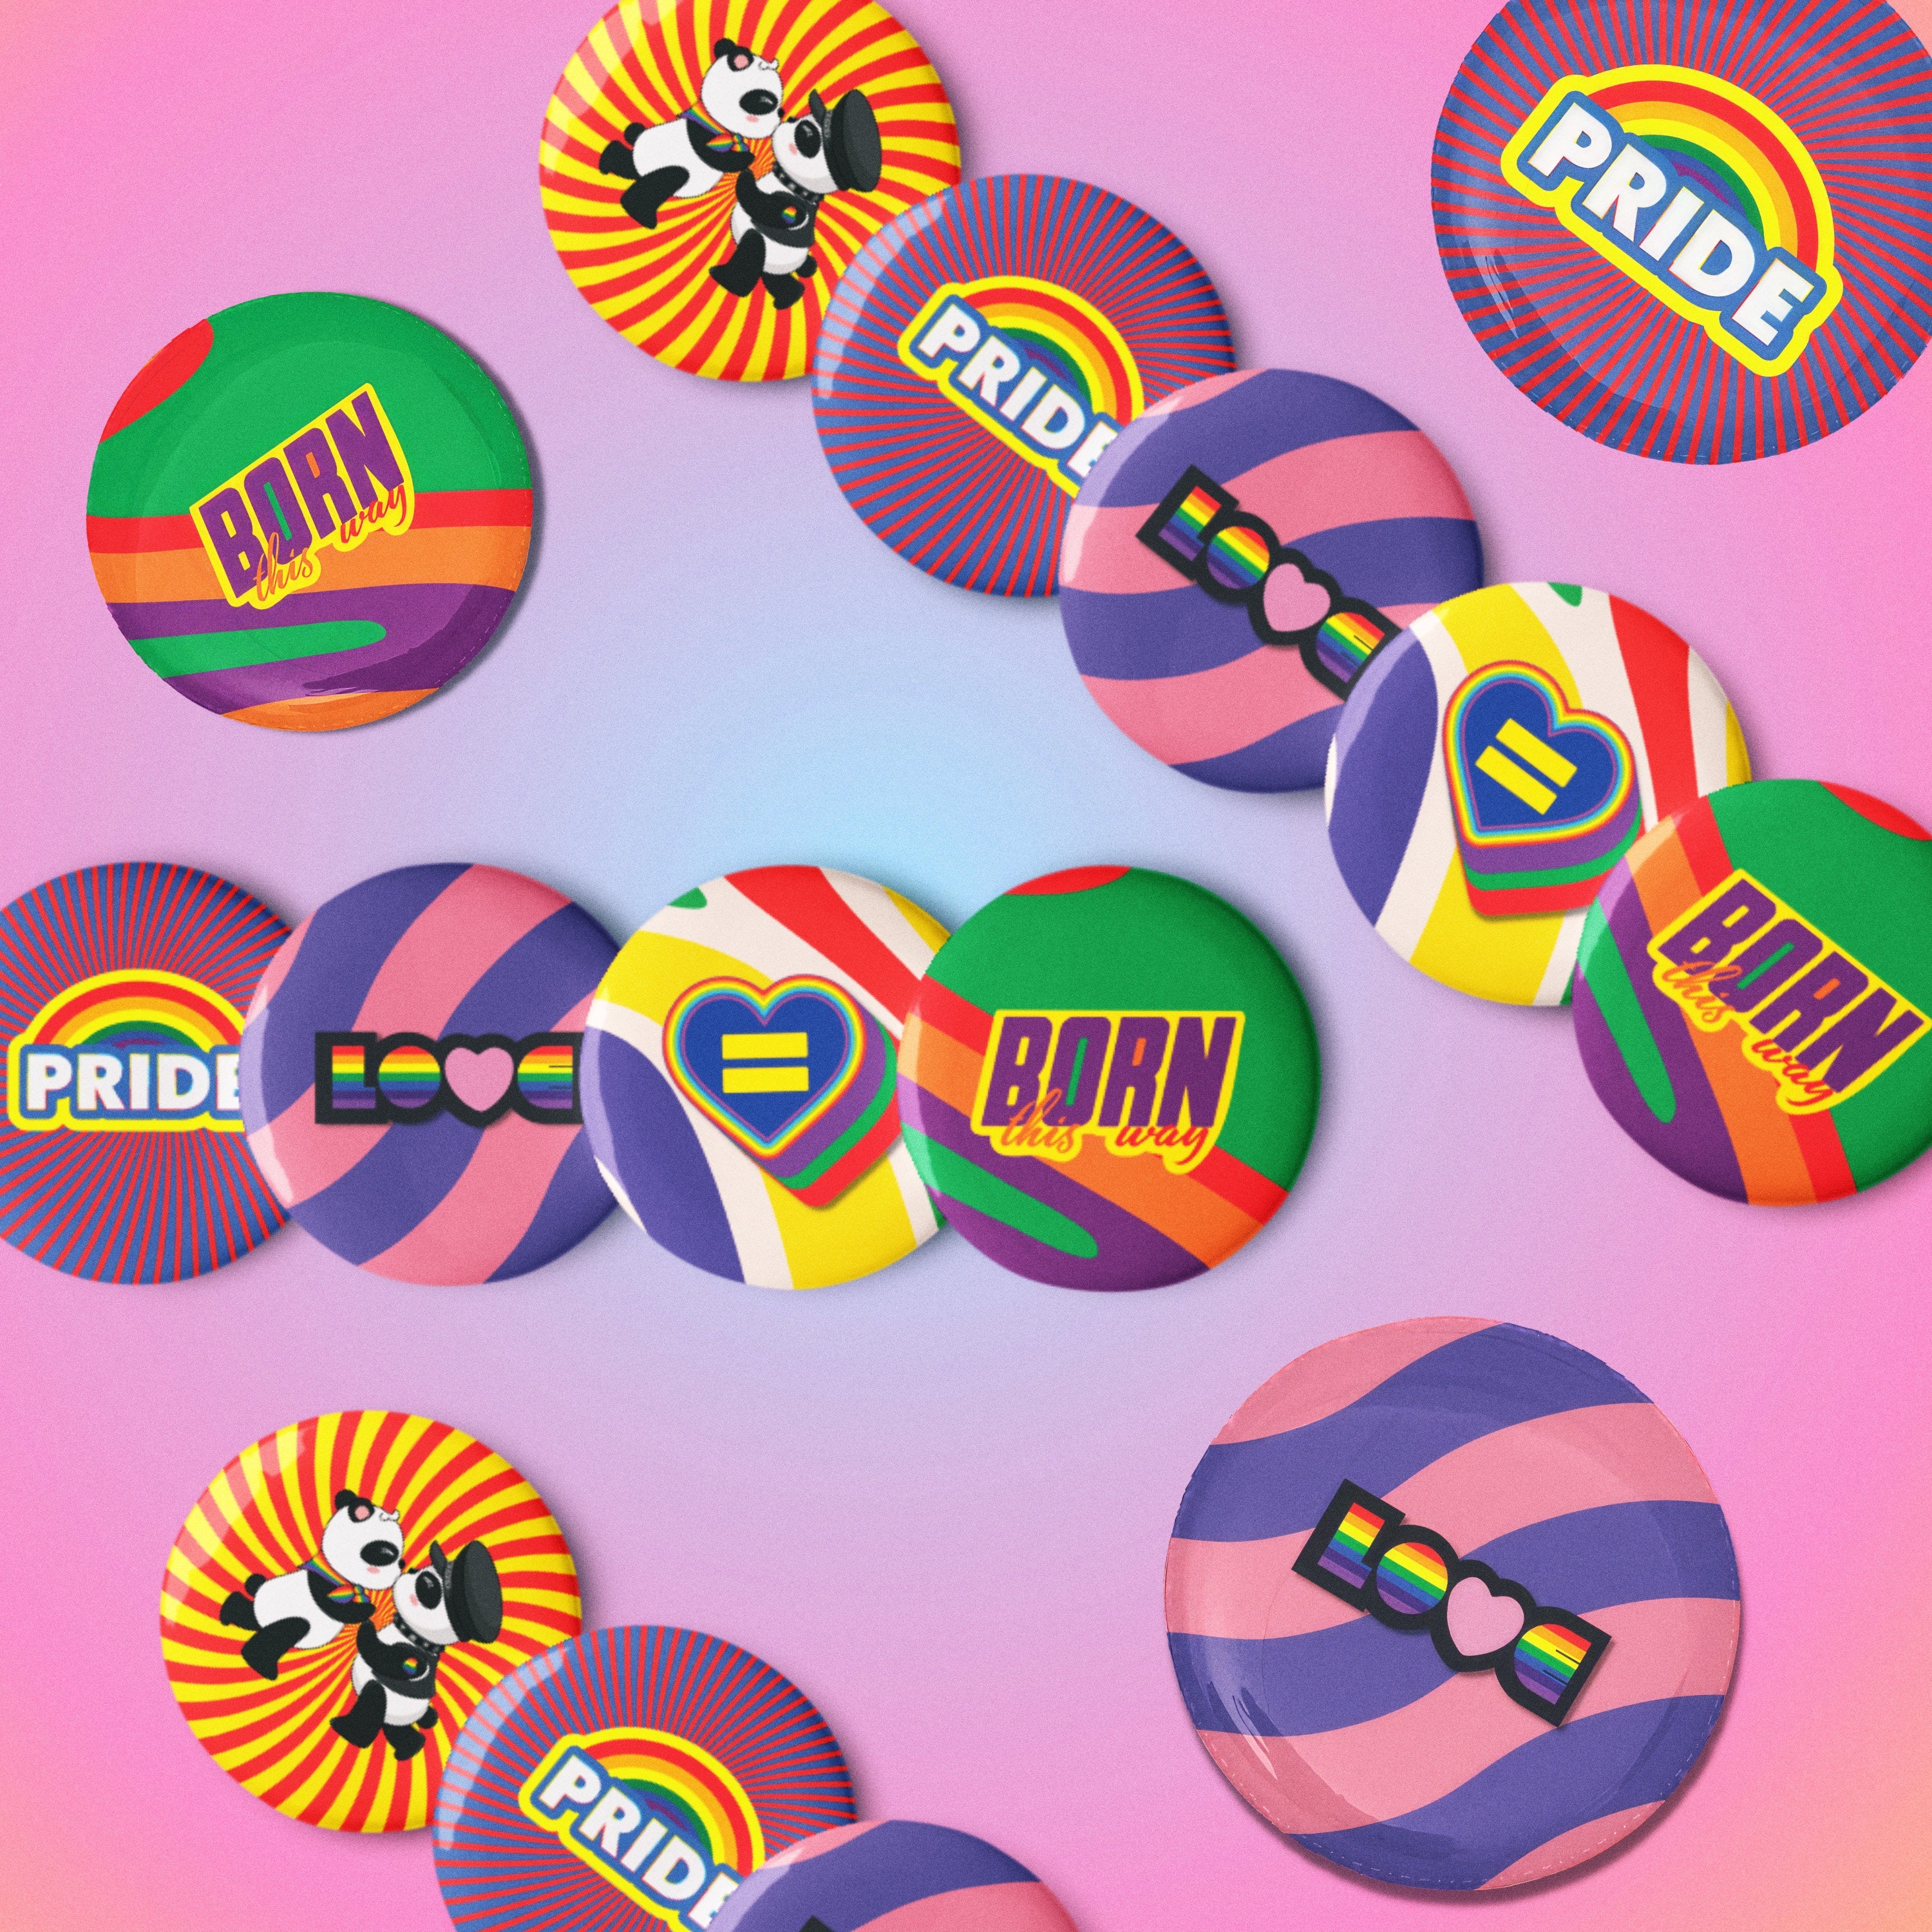 Proudly You LGBTQ Pride Button Pins Set - 5 Pack  Pride Pin, Gay Pins, Gay Pride, LGBTQ Pins - Show your True Colors